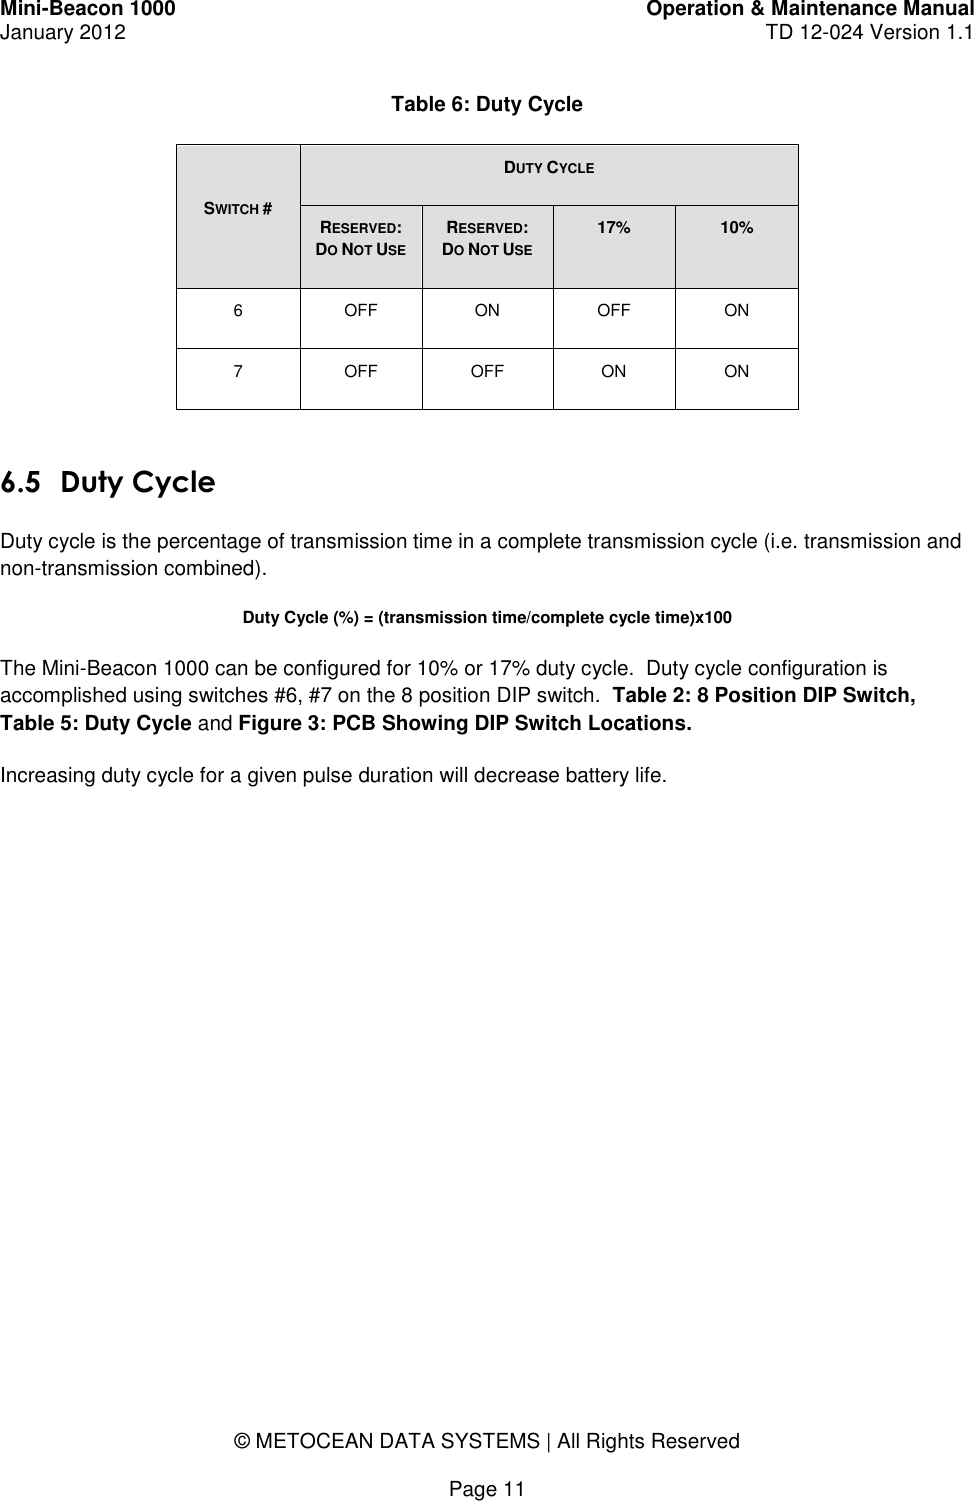 Mini-Beacon 1000 Operation &amp; Maintenance Manual January 2012 TD 12-024 Version 1.1    © METOCEAN DATA SYSTEMS | All Rights Reserved  Page 11 Table 6: Duty Cycle SWITCH # DUTY CYCLE RESERVED: DO NOT USE RESERVED:  DO NOT USE 17% 10% 6 OFF ON OFF ON 7 OFF OFF ON ON  6.5 Duty Cycle Duty cycle is the percentage of transmission time in a complete transmission cycle (i.e. transmission and non-transmission combined).   Duty Cycle (%) = (transmission time/complete cycle time)x100 The Mini-Beacon 1000 can be configured for 10% or 17% duty cycle.  Duty cycle configuration is accomplished using switches #6, #7 on the 8 position DIP switch.  Table 2: 8 Position DIP Switch, Table 5: Duty Cycle and Figure 3: PCB Showing DIP Switch Locations. Increasing duty cycle for a given pulse duration will decrease battery life.   